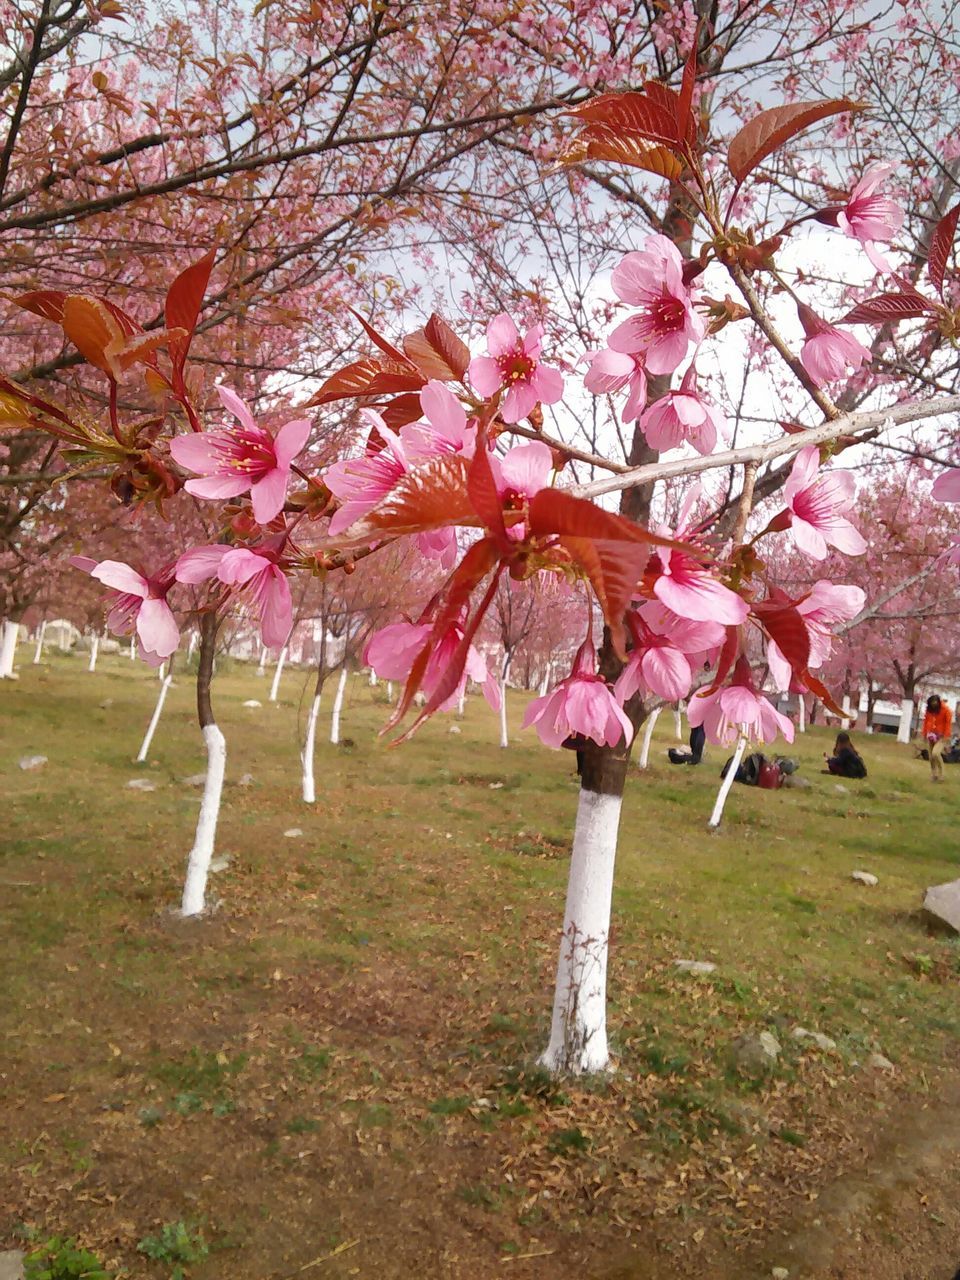 tree, flower, grass, branch, growth, beauty in nature, nature, tree trunk, pink color, freshness, field, park - man made space, tranquility, fragility, blossom, day, cherry blossom, cherry tree, landscape, tranquil scene